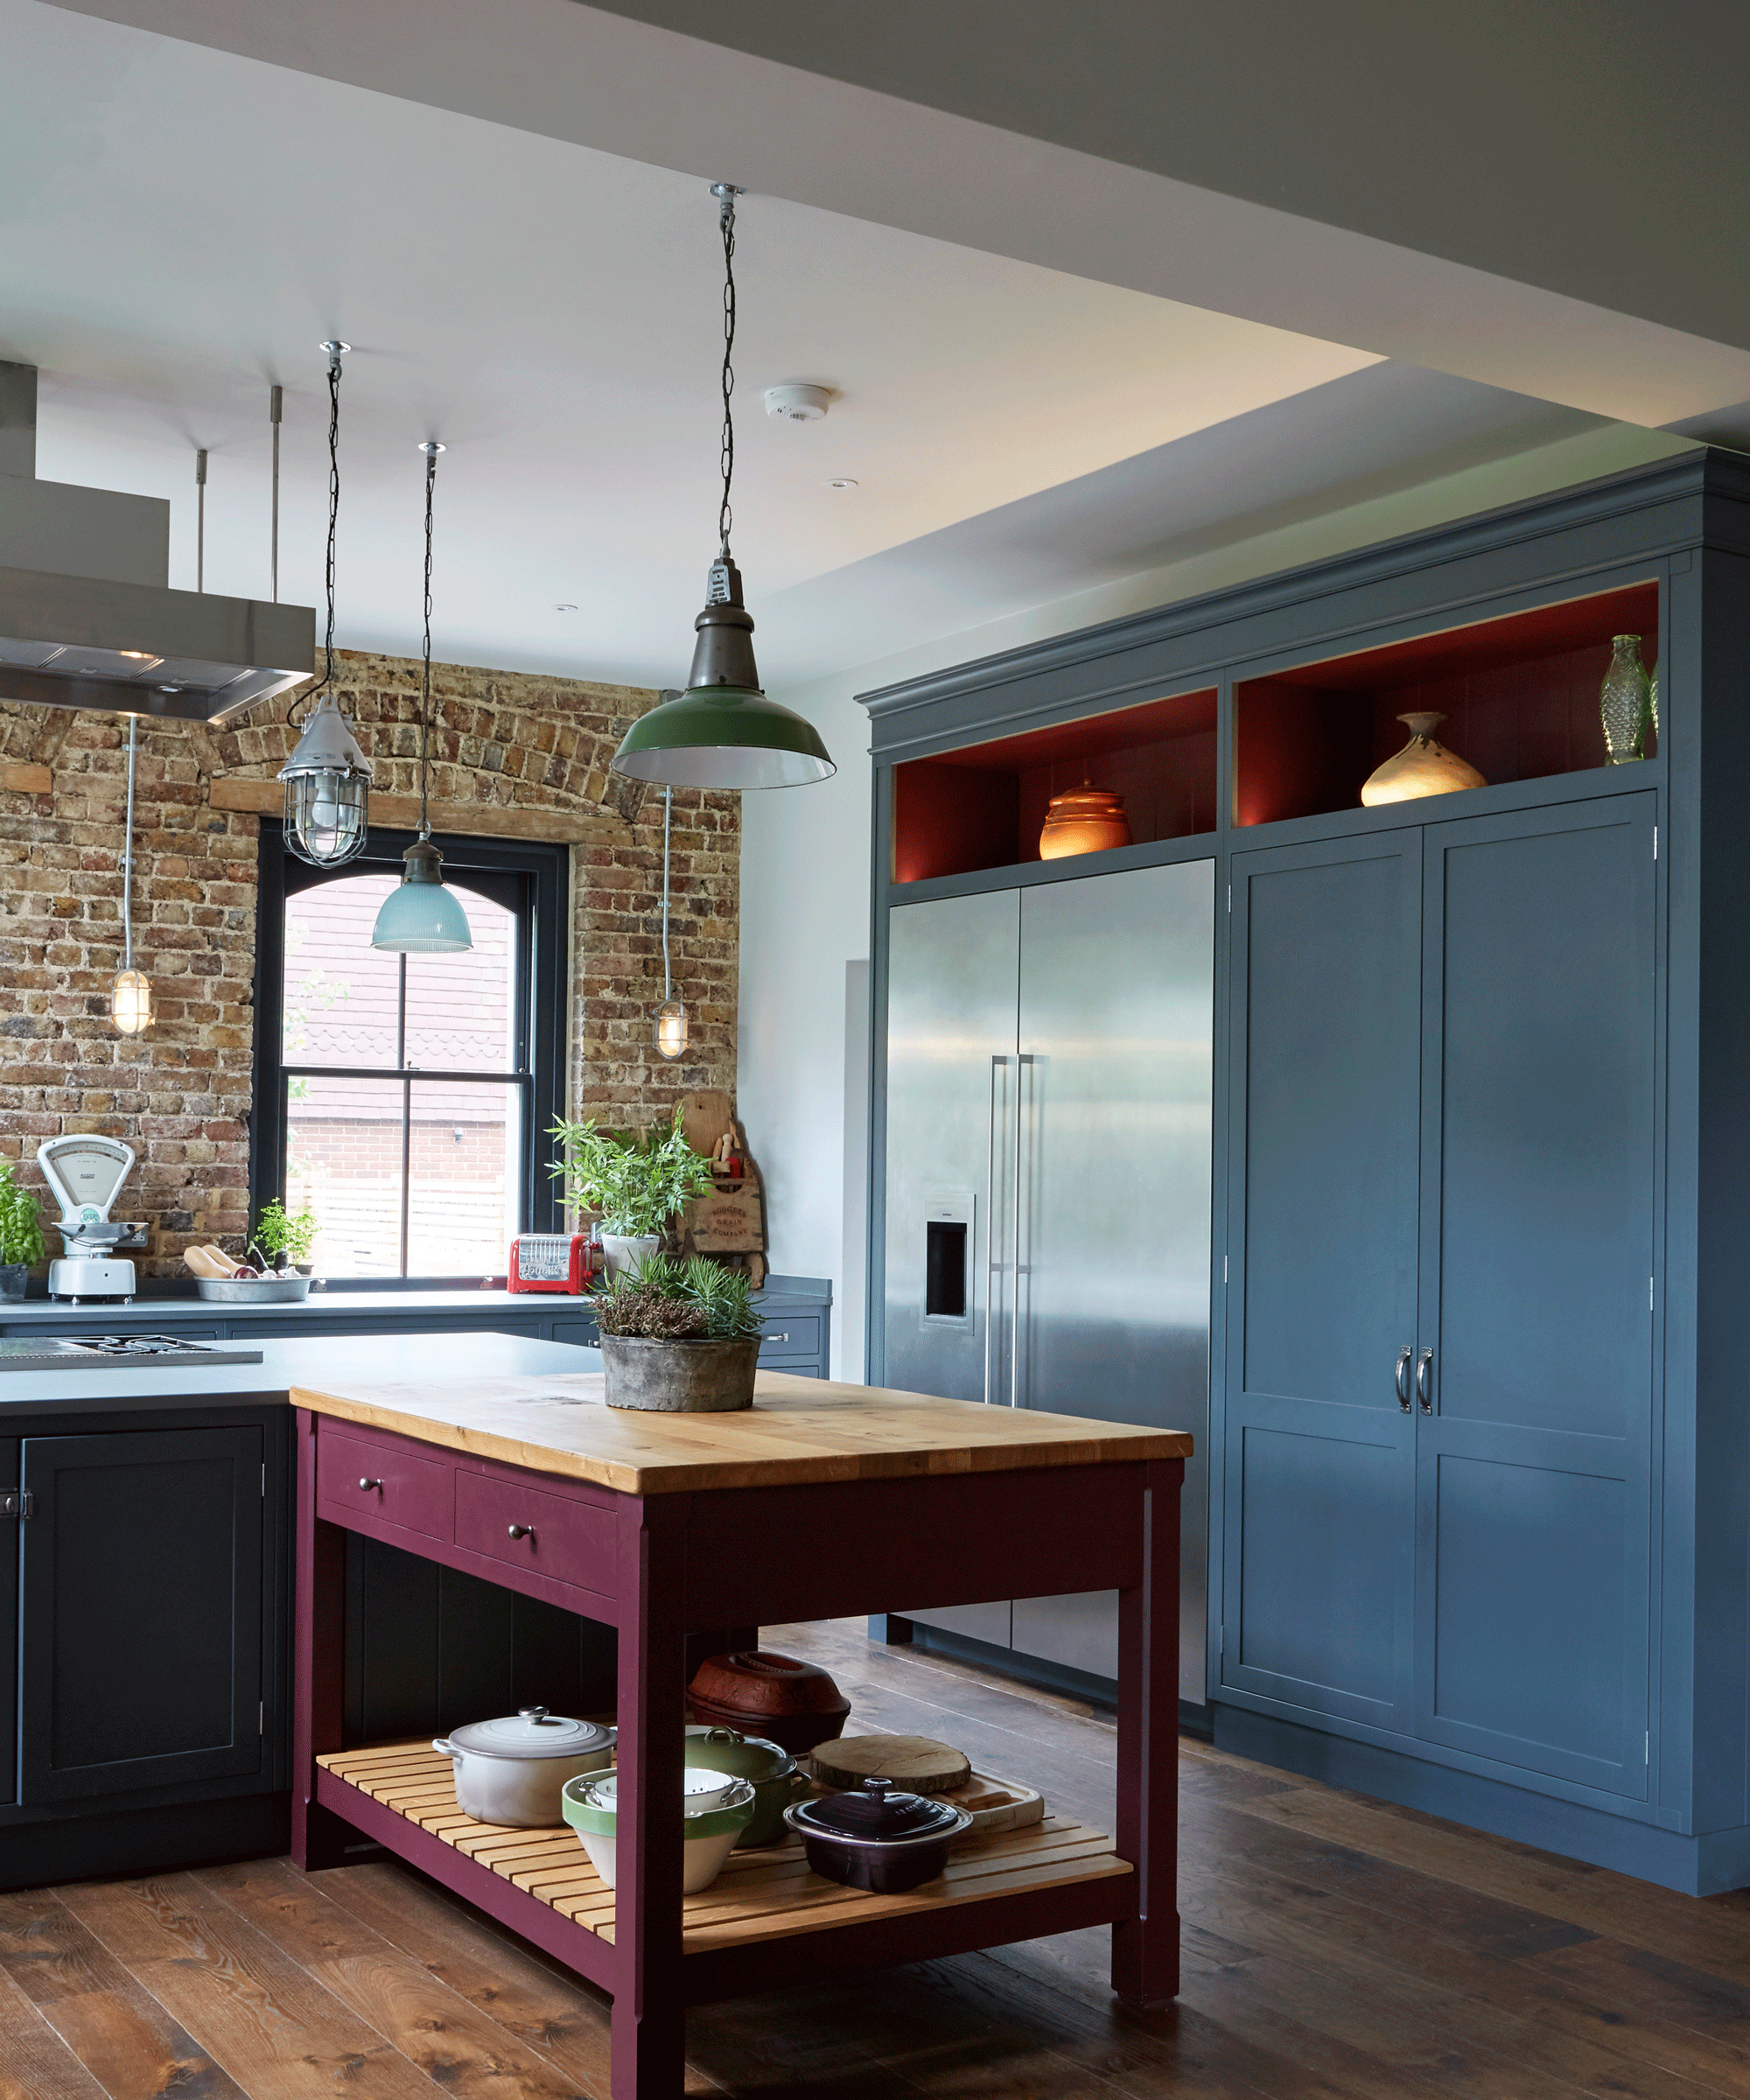 Blue kitchen with red alcoves and purple freestanding kitchen island